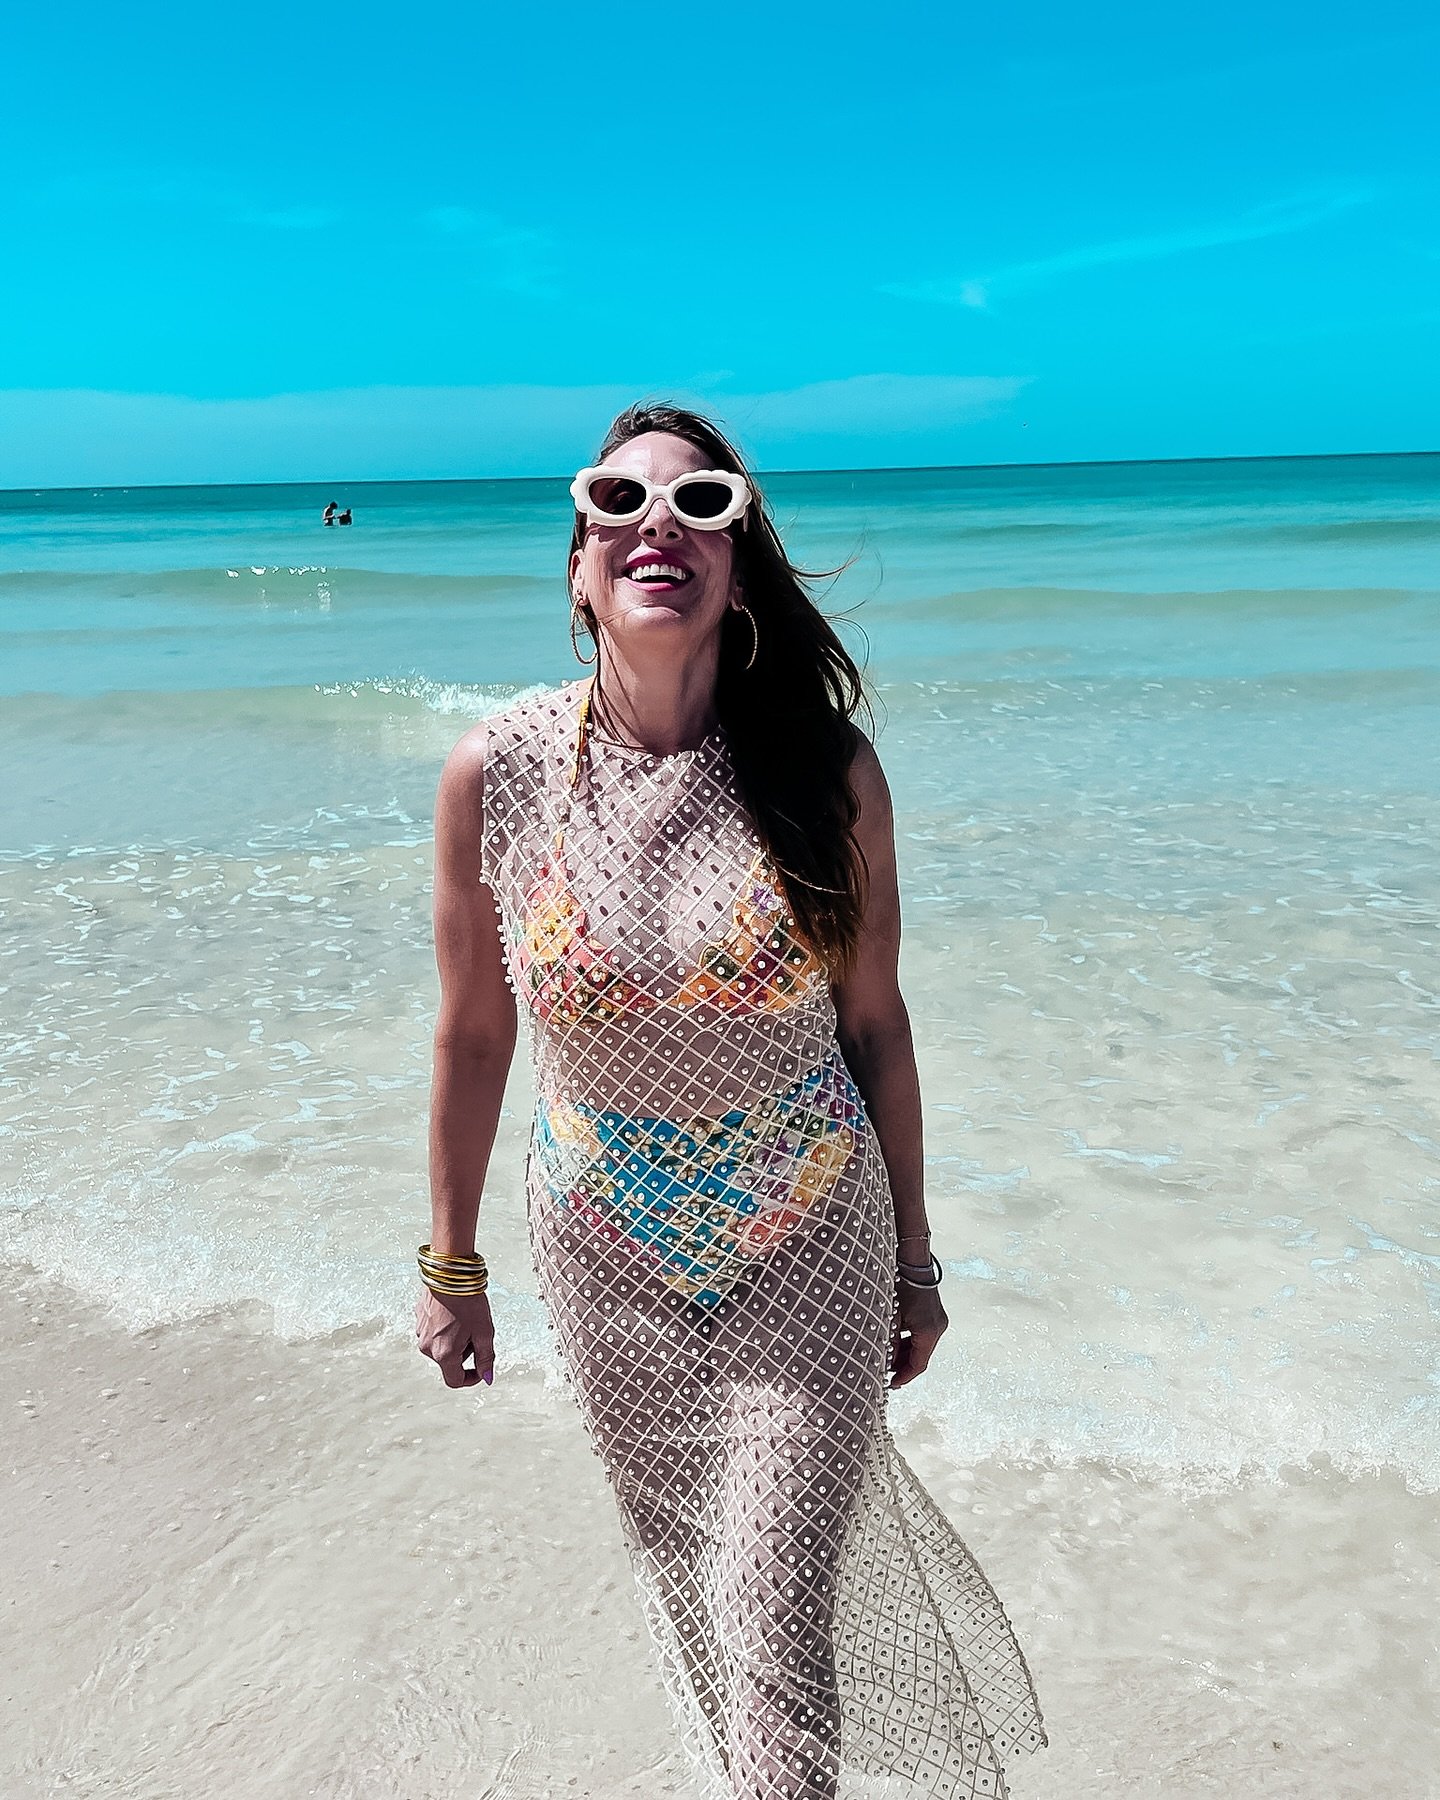 With Summer around the corner it&rsquo;s definitely time to talk bathing suits and coverups. I&rsquo;ve put together an edit of some of my favorite styles for the season. Check out stories to shop 👙🏖️☀️